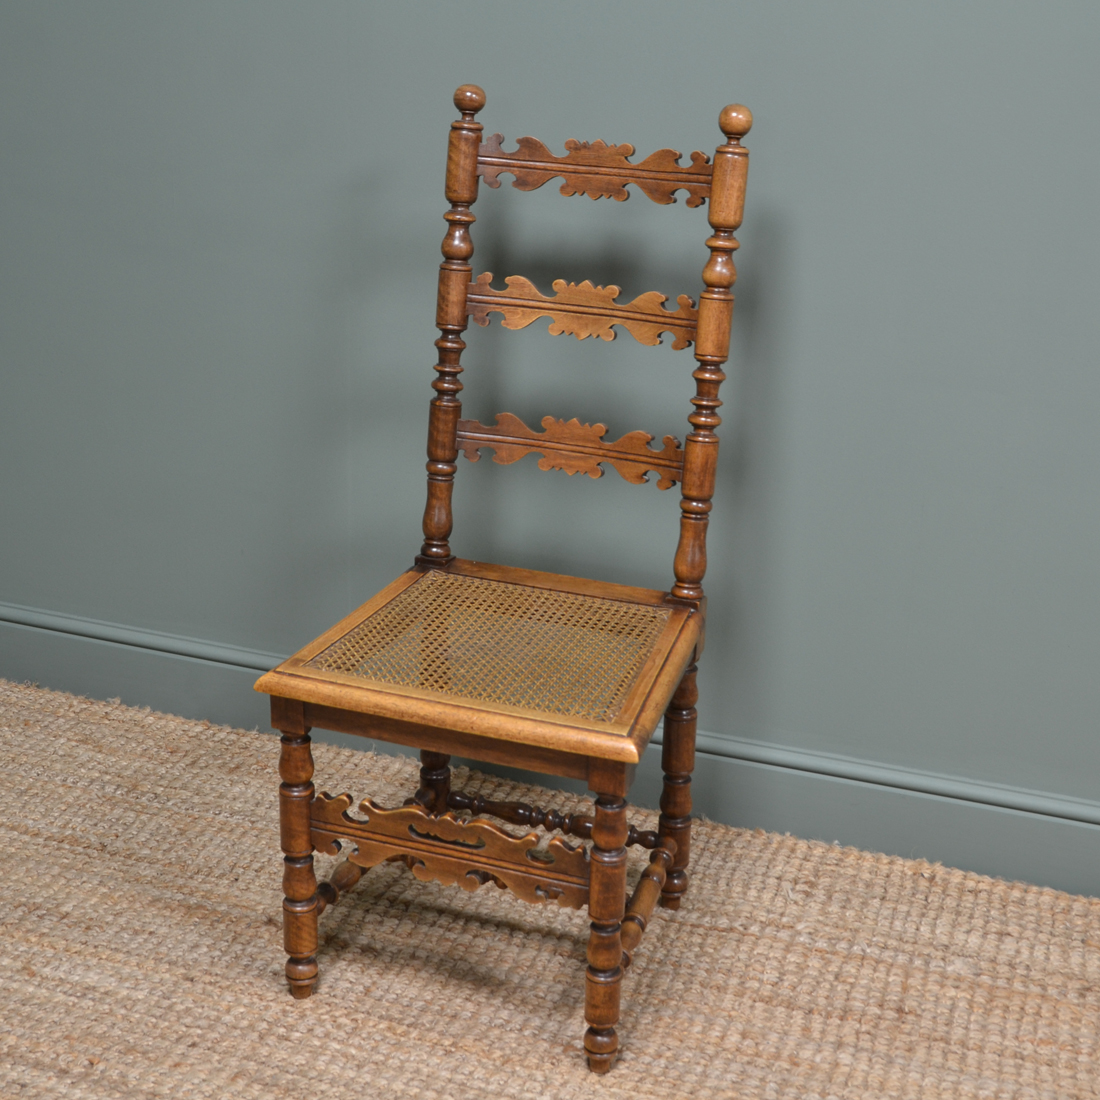 Pair of Fruitwood Antique Ladder Back Chairs - Image 4 of 8